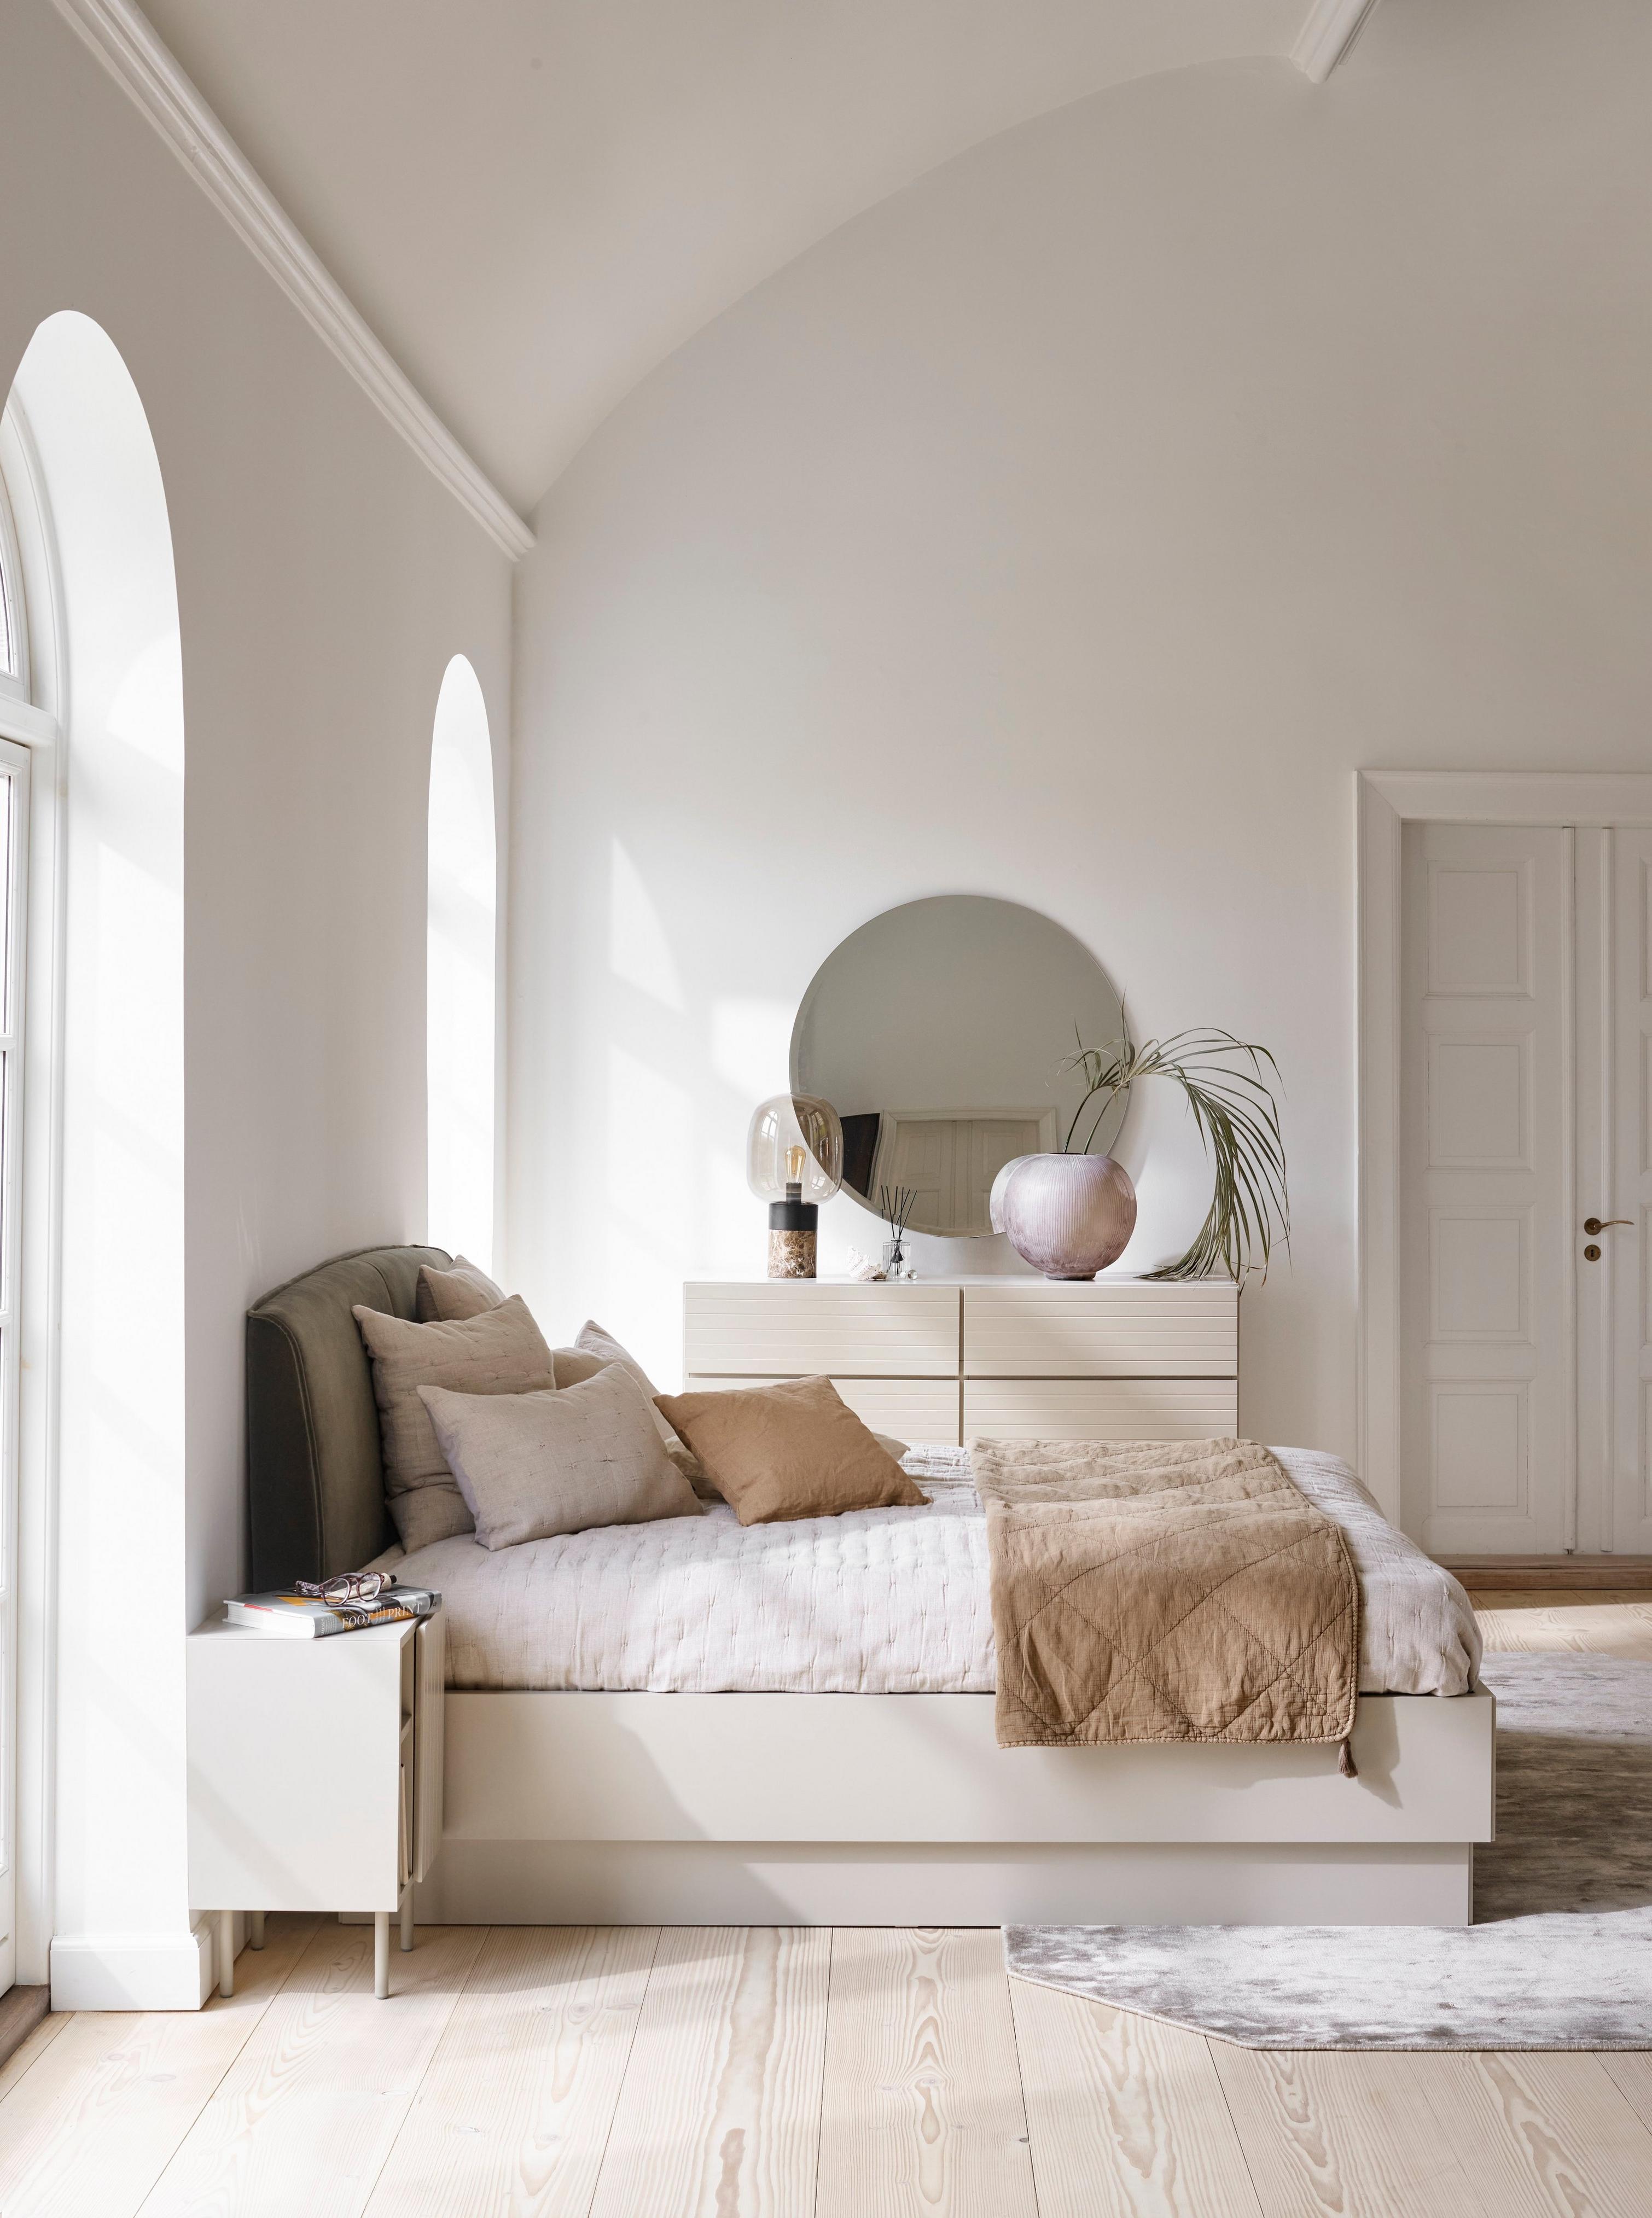 Arched bedroom with a bed, round mirror, side table, plant, and neutral-toned bedding.